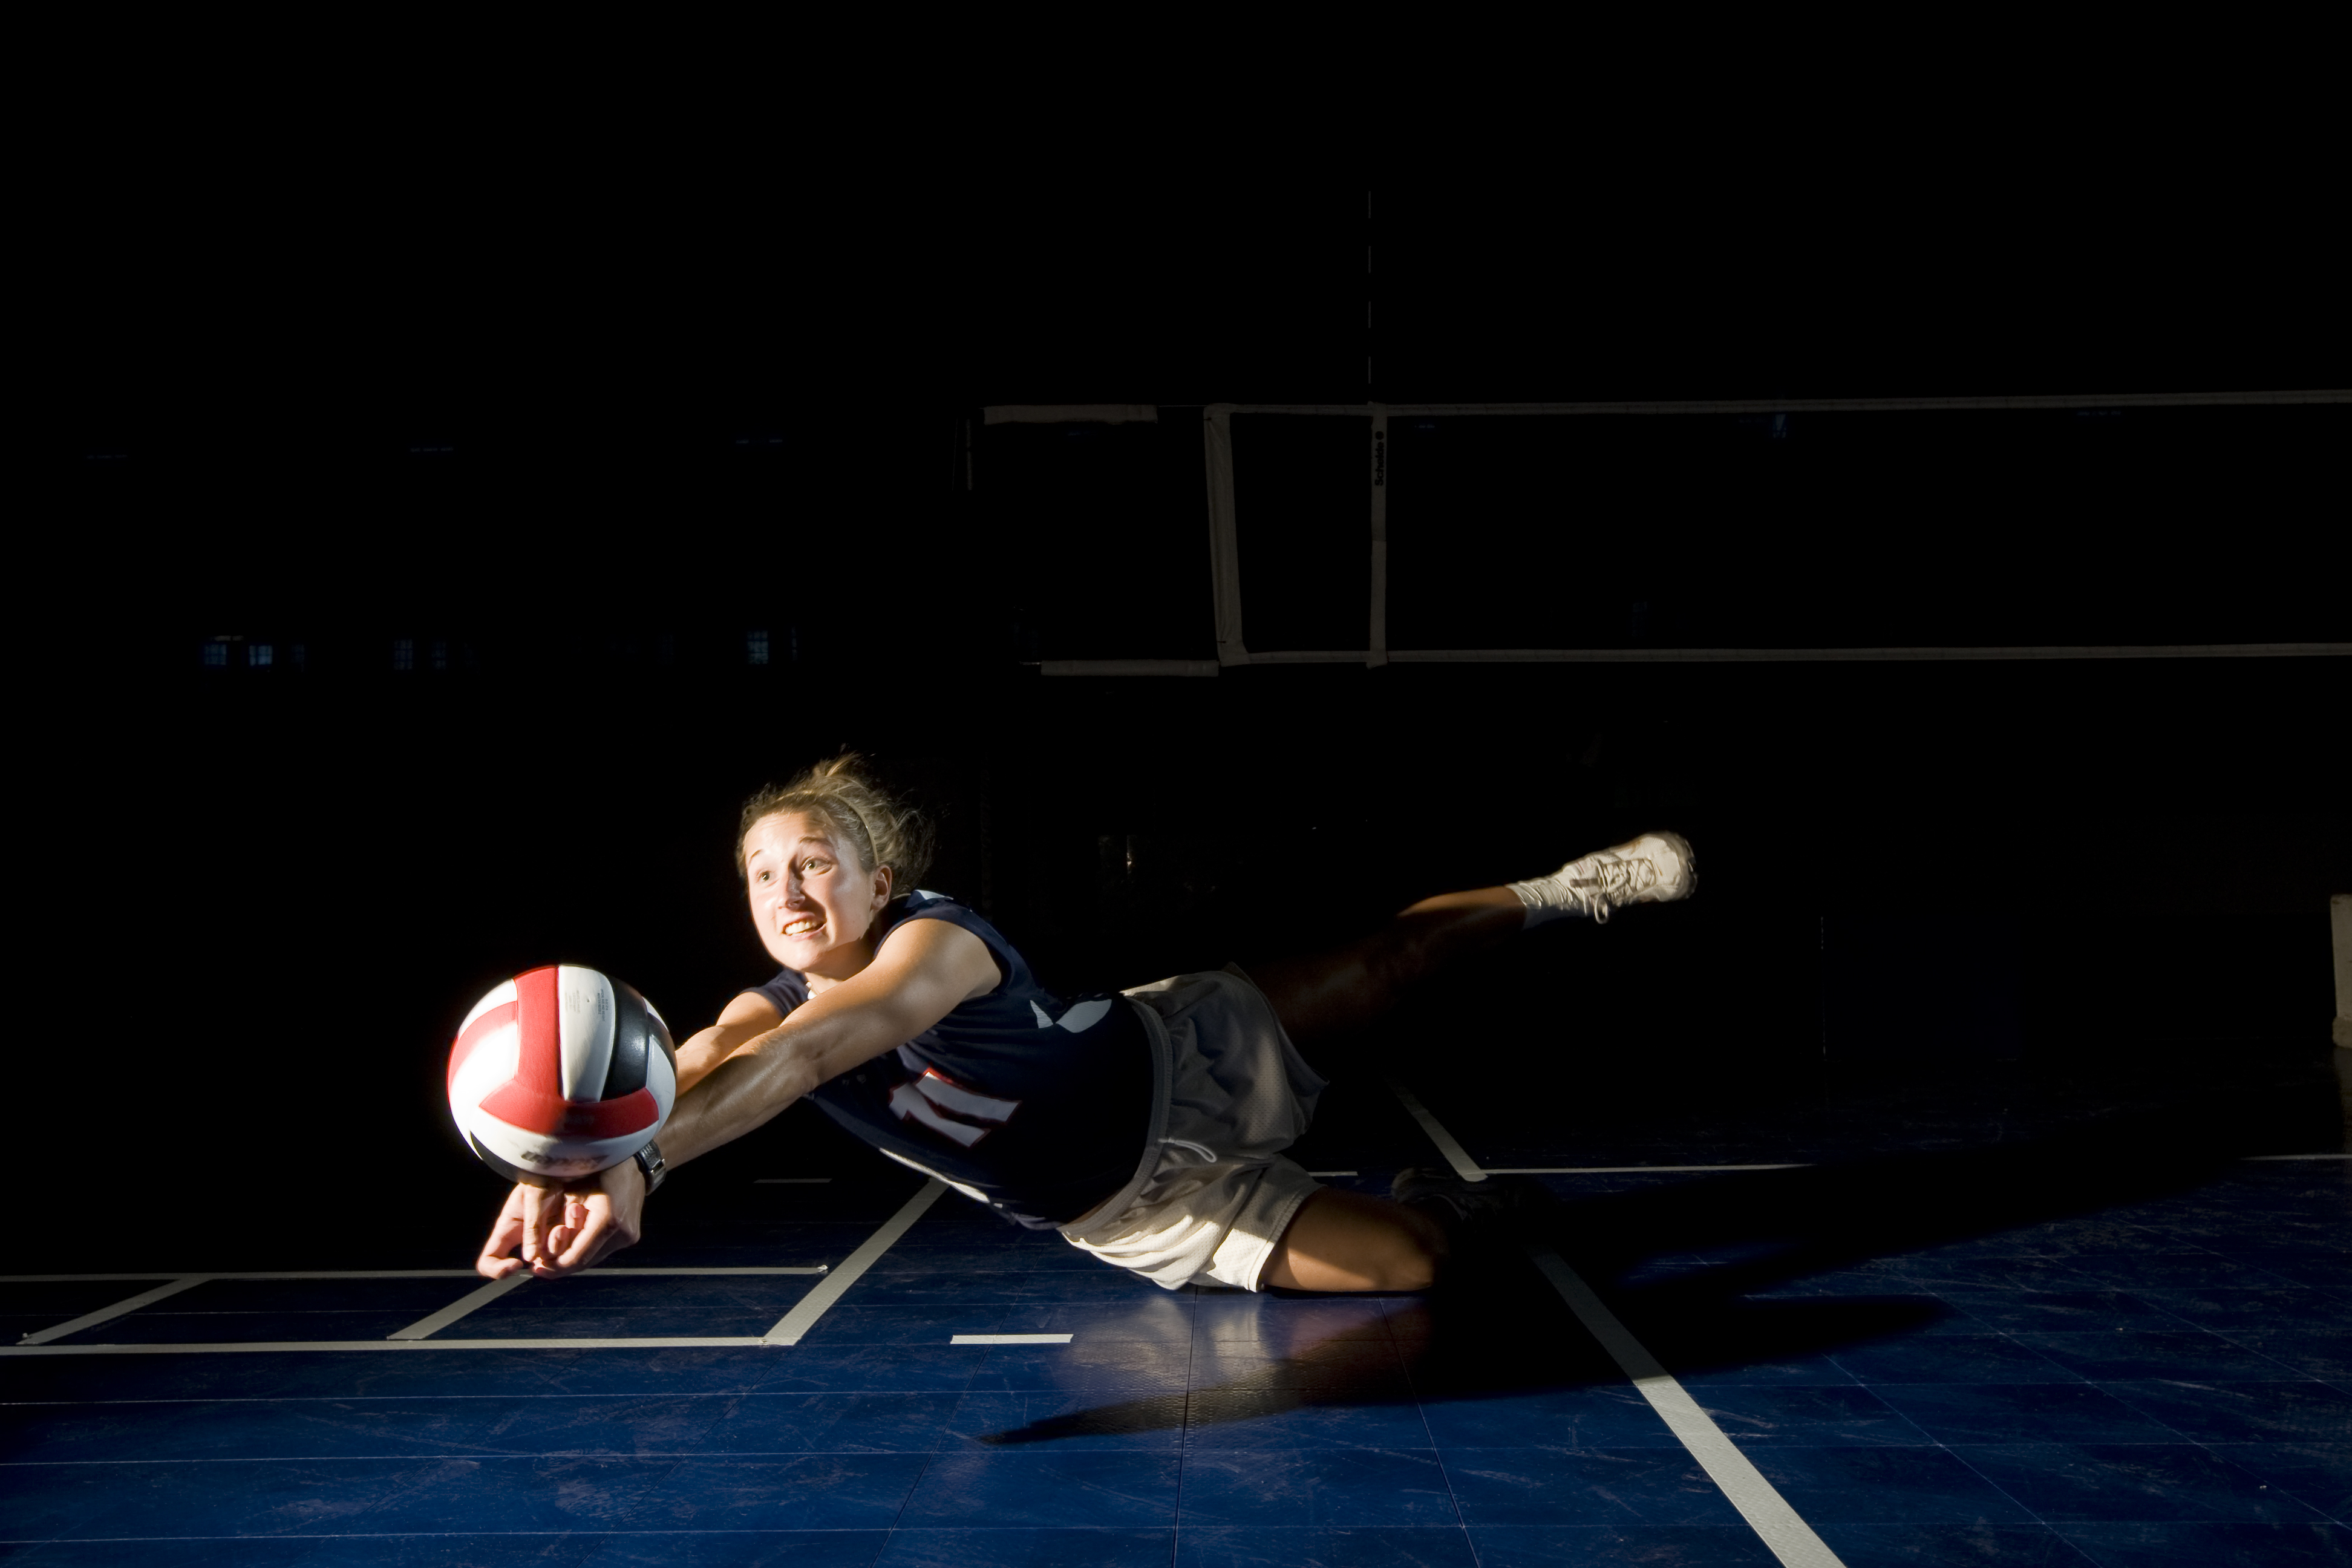 volleyball player diving to bump ball